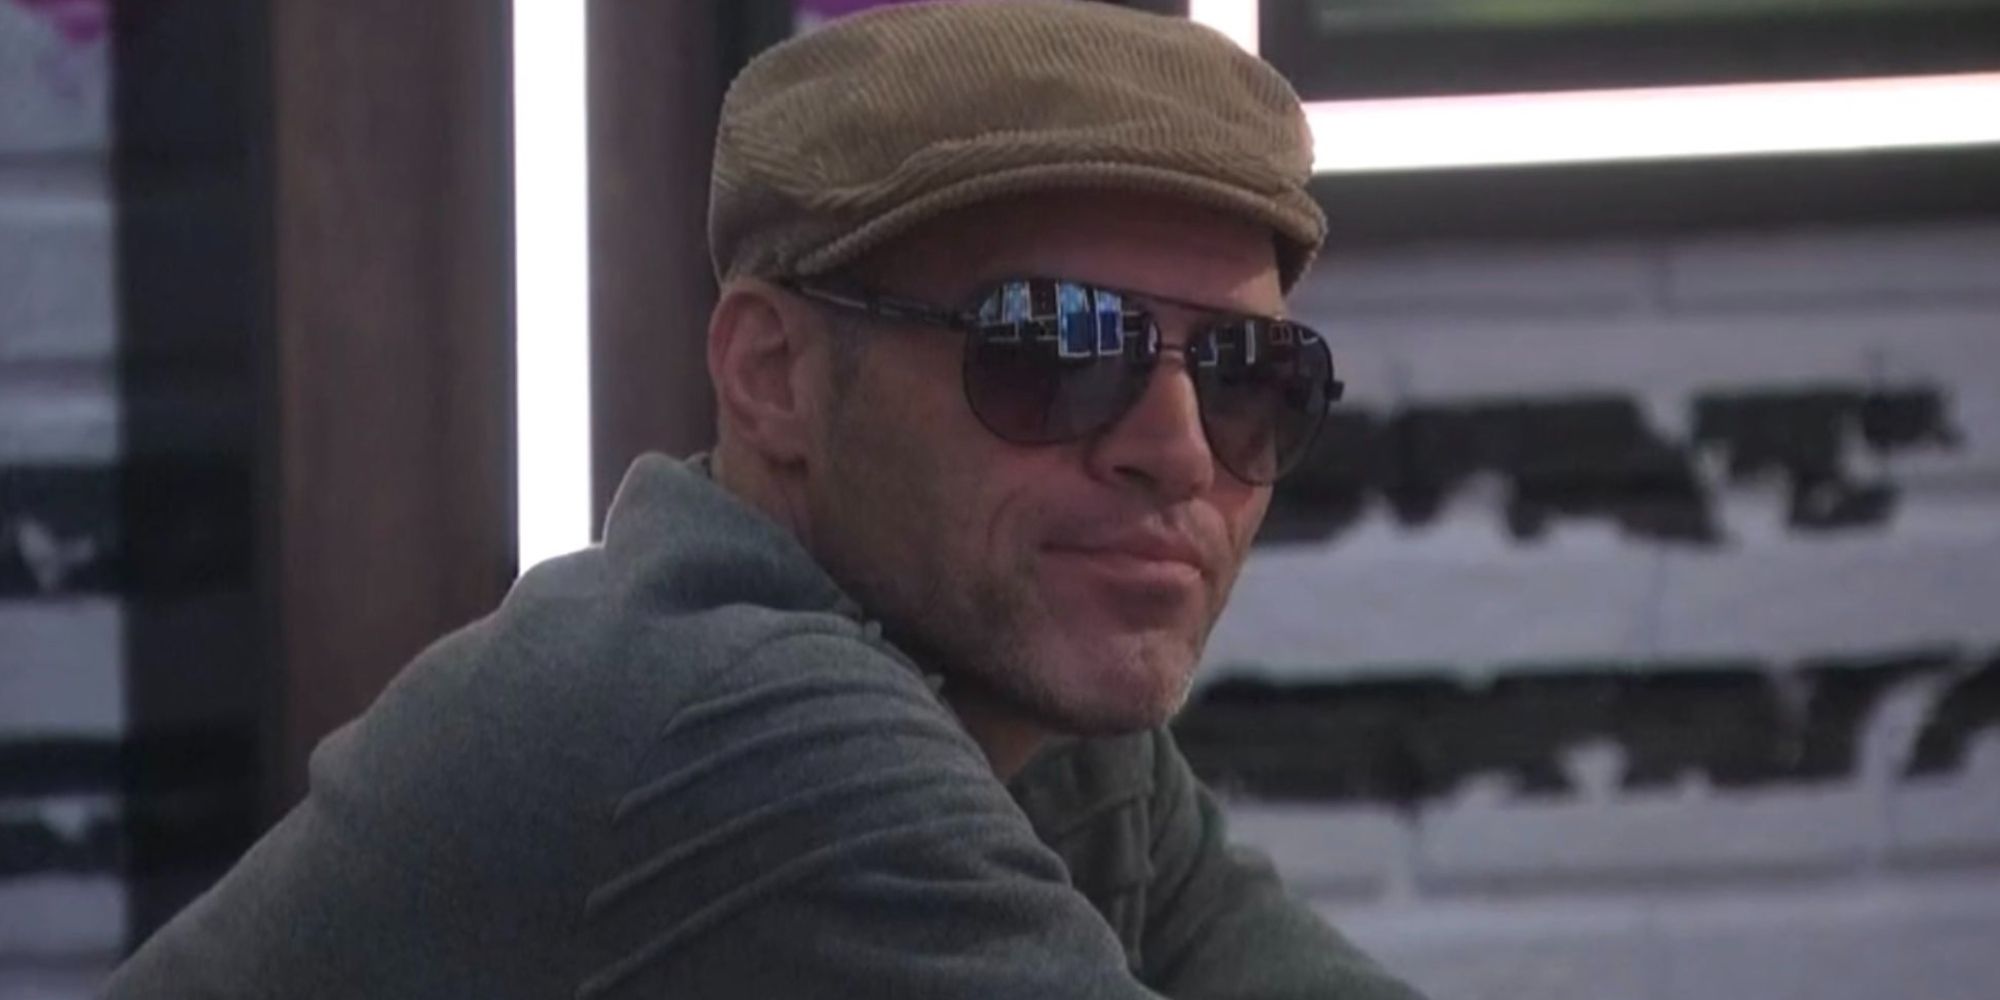 Enzo sitting with a hat and dark sunglasses in a scene from Big Brother 22.